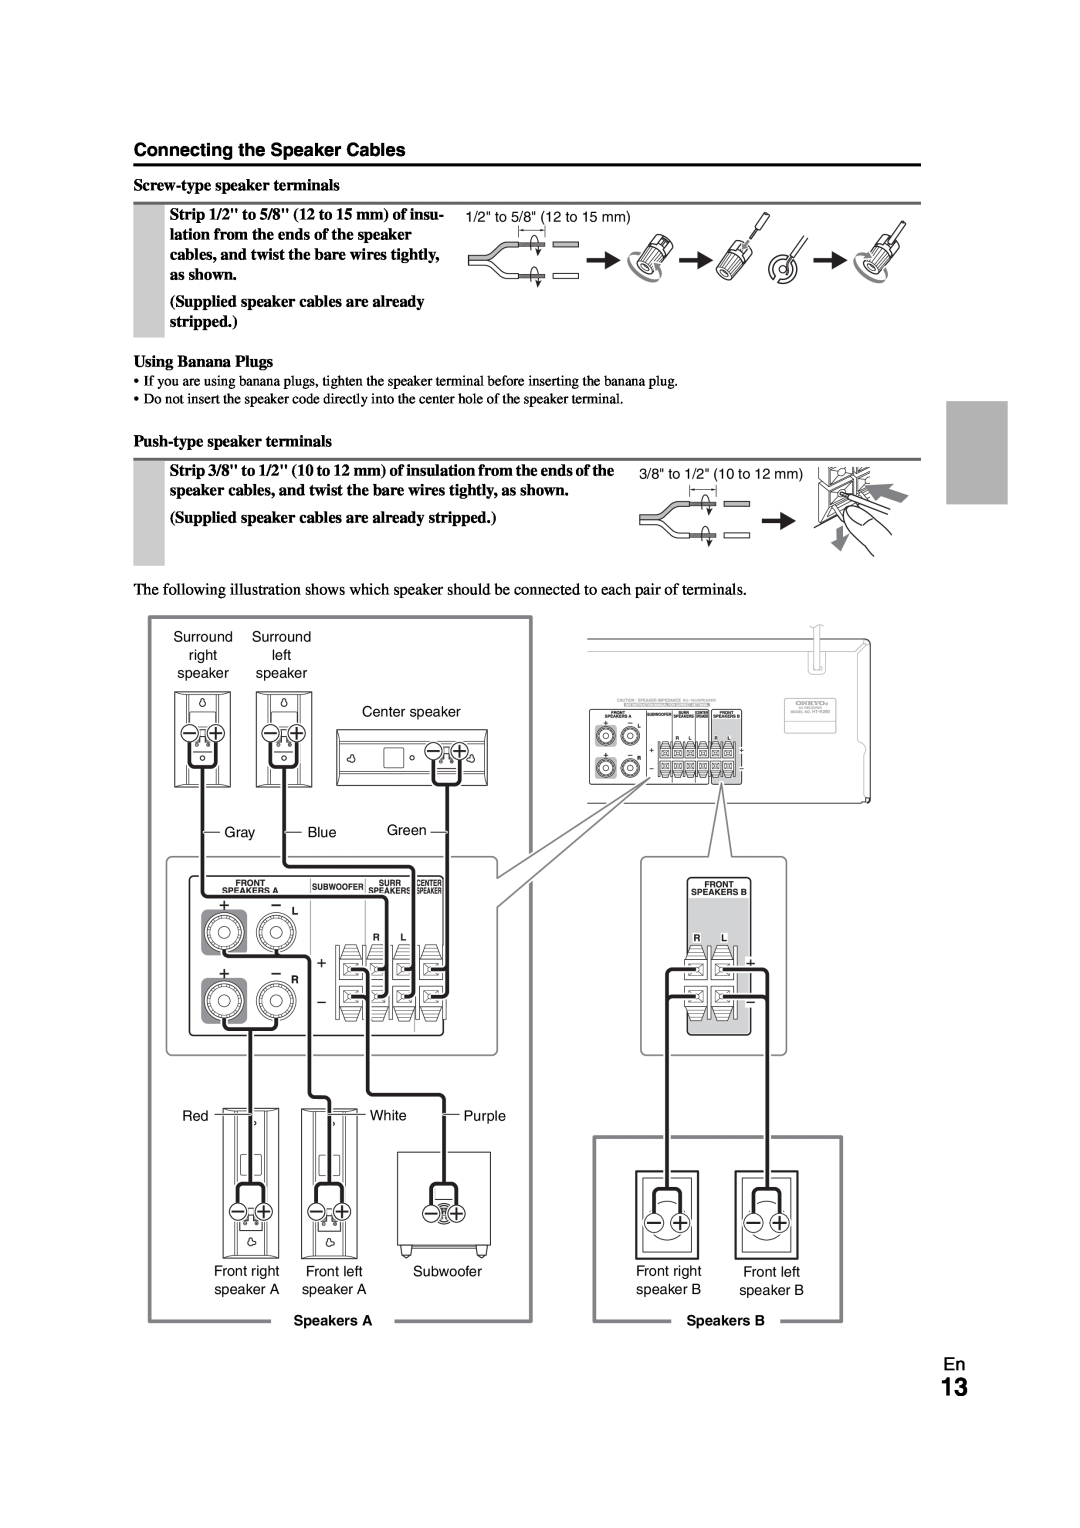 Onkyo AVX-280 instruction manual Connecting the Speaker Cables, Screw-typespeaker terminals 